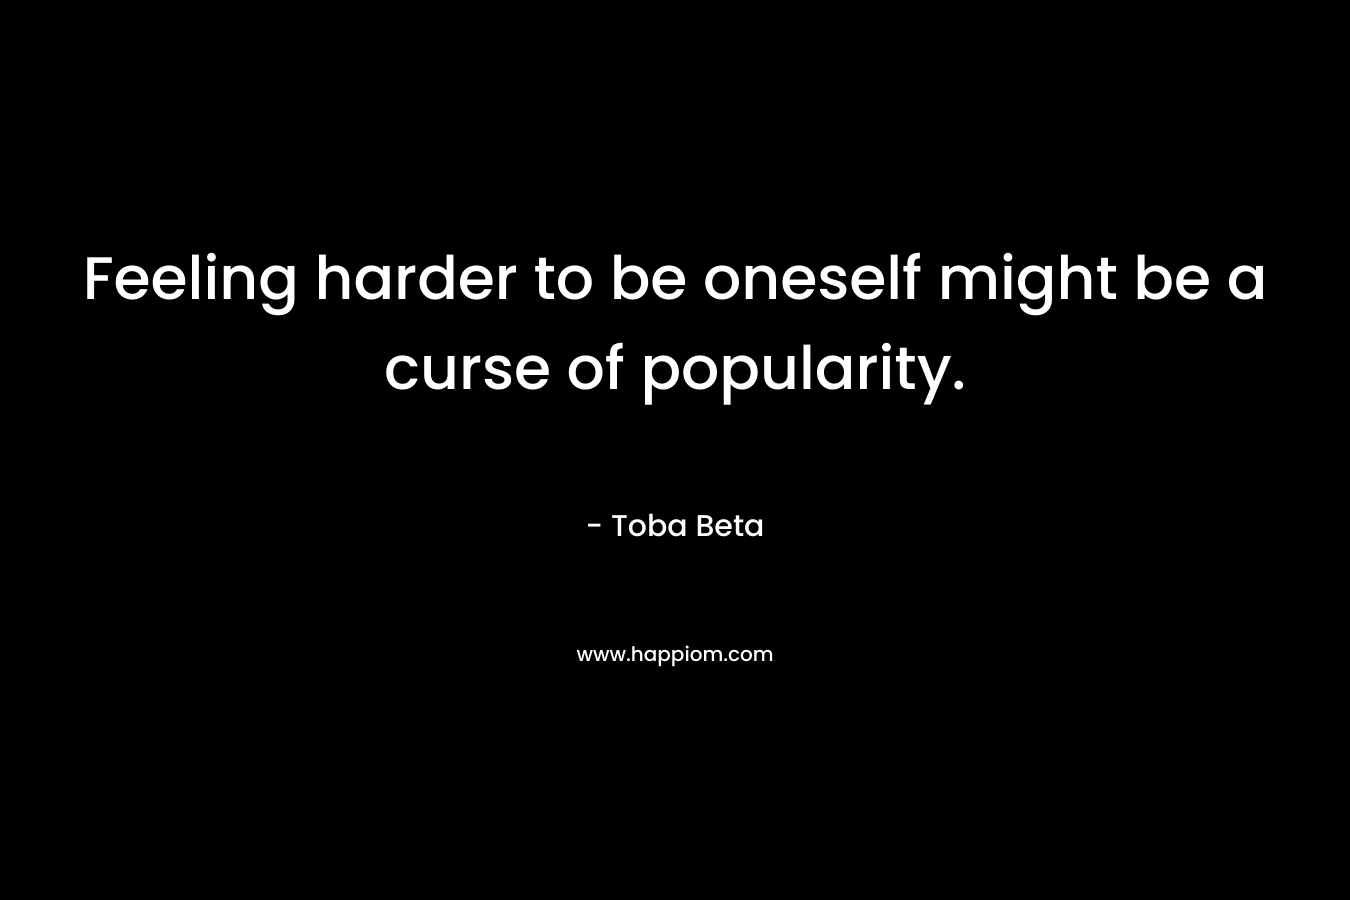 Feeling harder to be oneself might be a curse of popularity. – Toba Beta